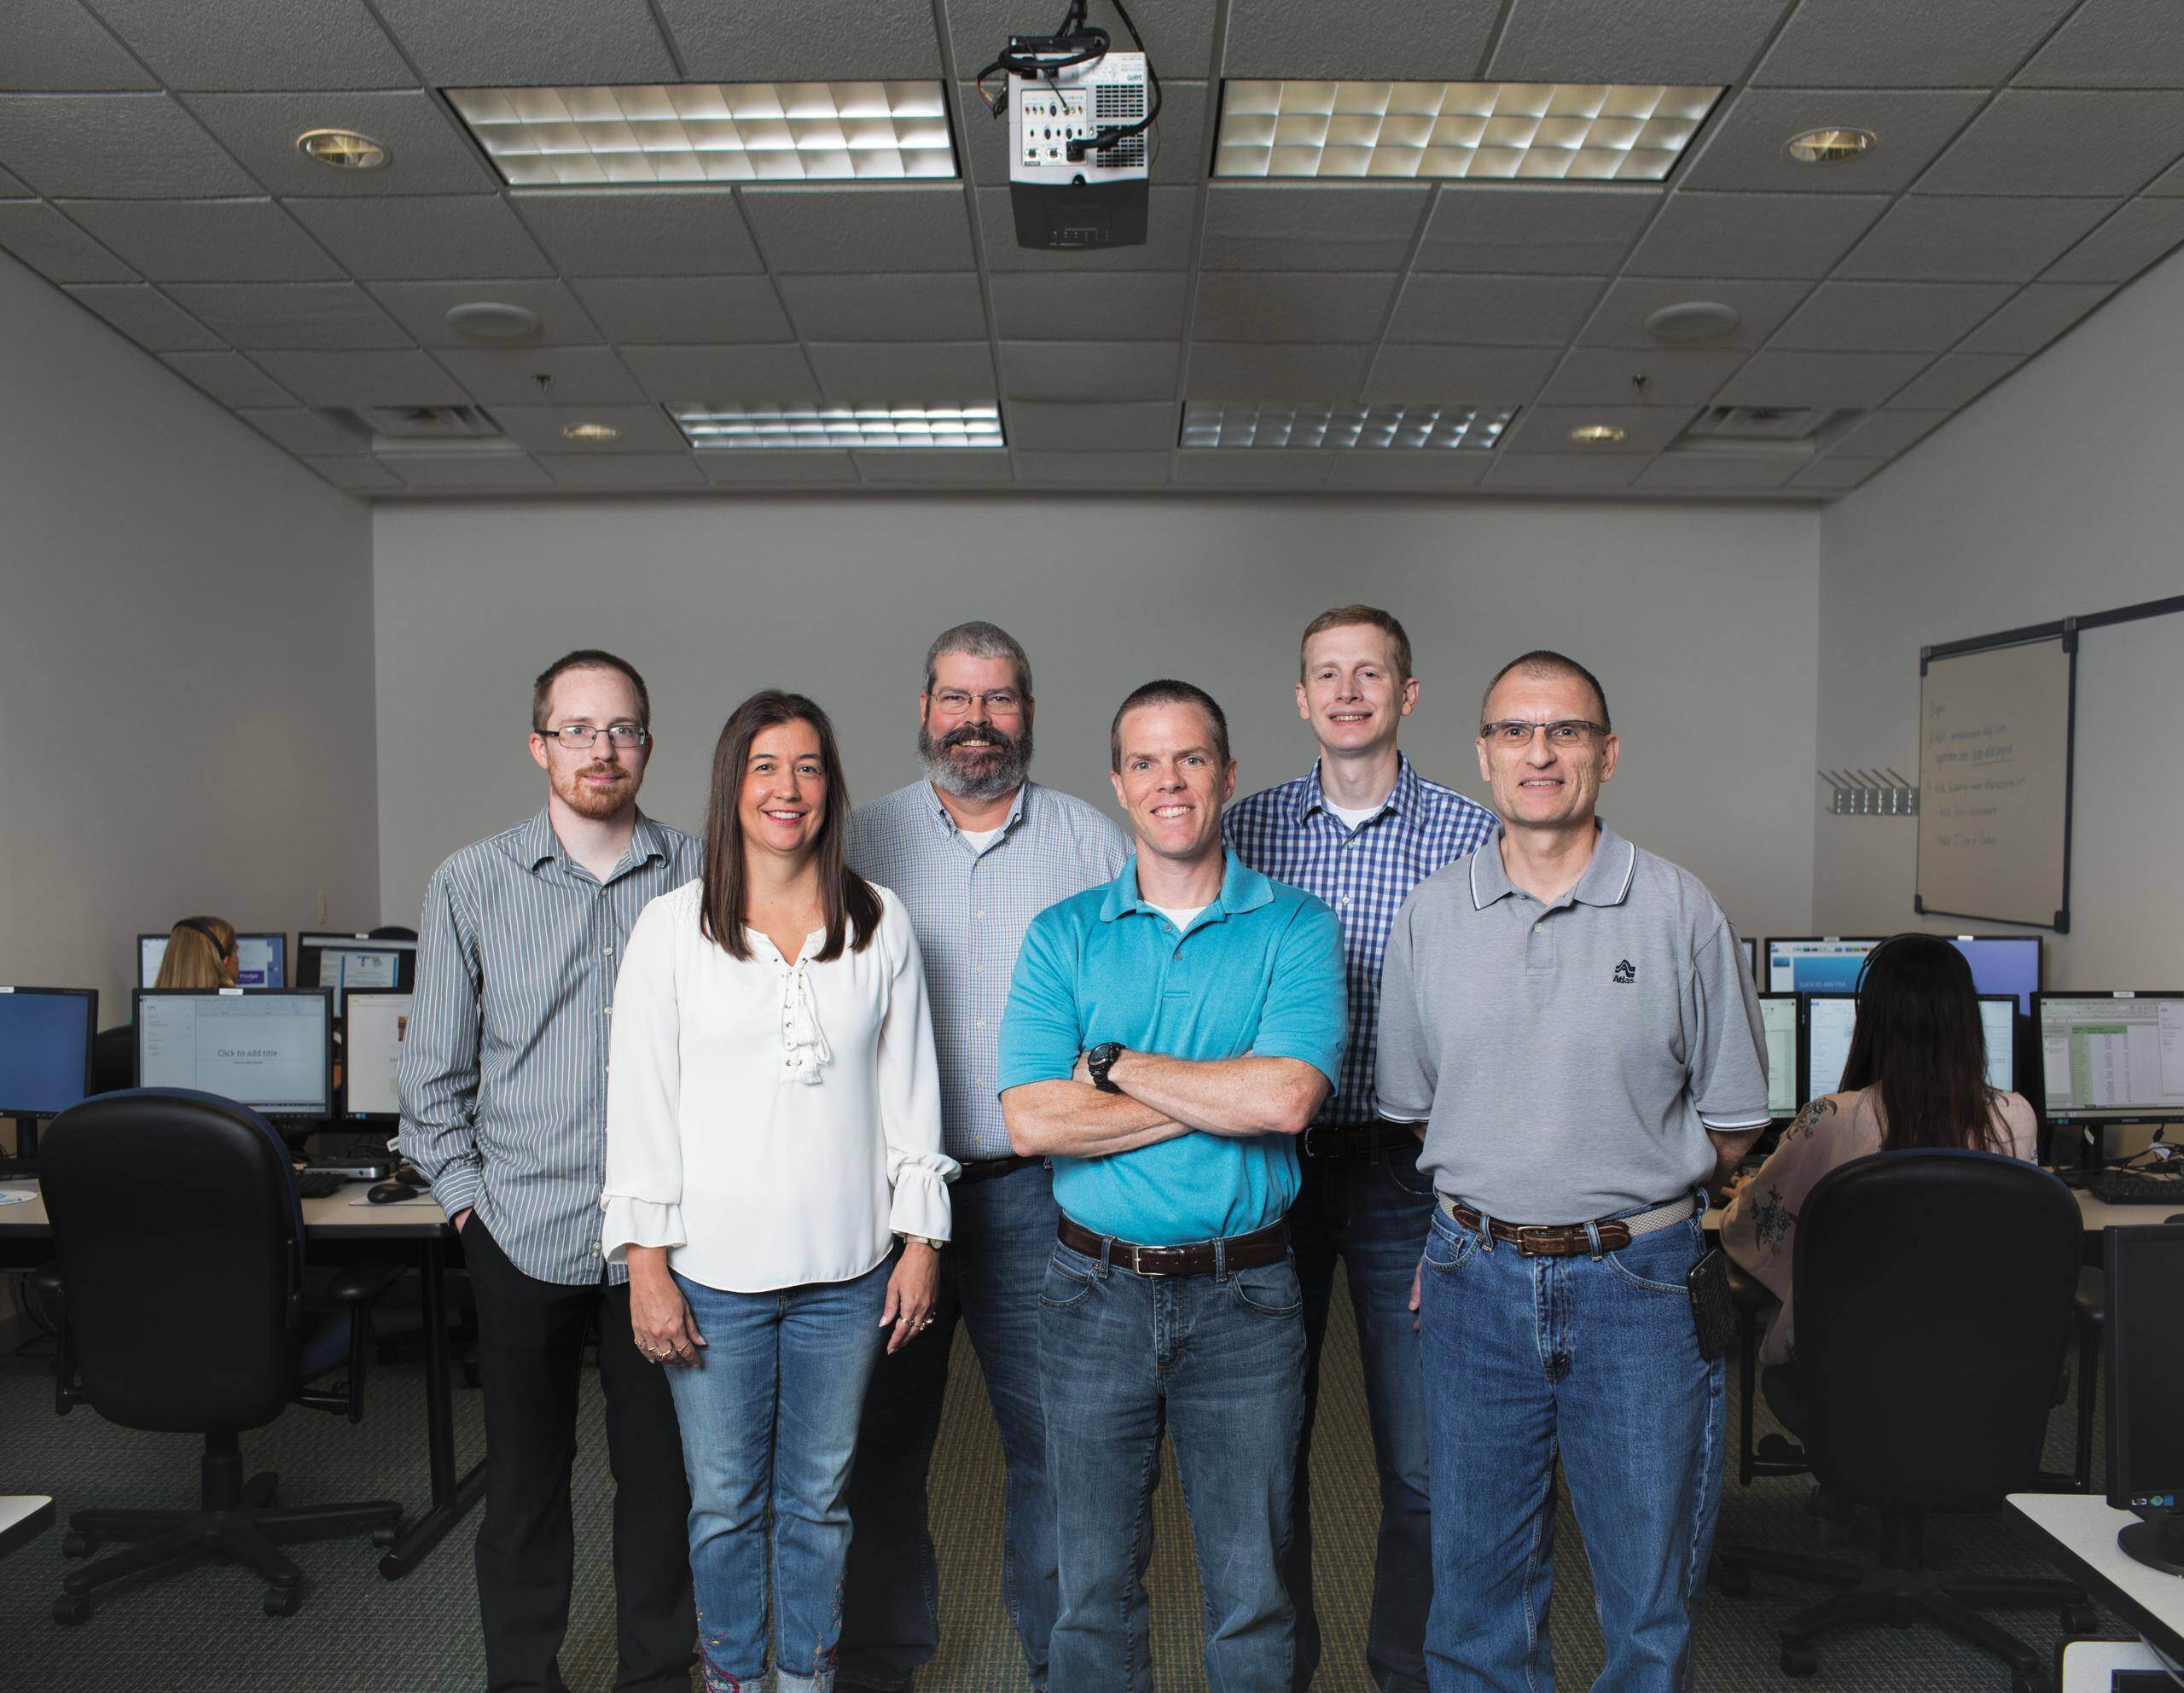 From left: Kenny McMichael, Manager, Help Desk, Ann Heathcott, Director, IT Network Services, JJ Mohr, Sr. Director, Information Technology, Ryan Parmenter, Director, IT Development, Joab Schultheis, VP & CIO, Bret Rauscher, Director, IT Development. During 2018, the IT team will work with Cornerstone Relocation Group to integrate shipment information with Atlas systems, making it more shareable with Atlas Agents.